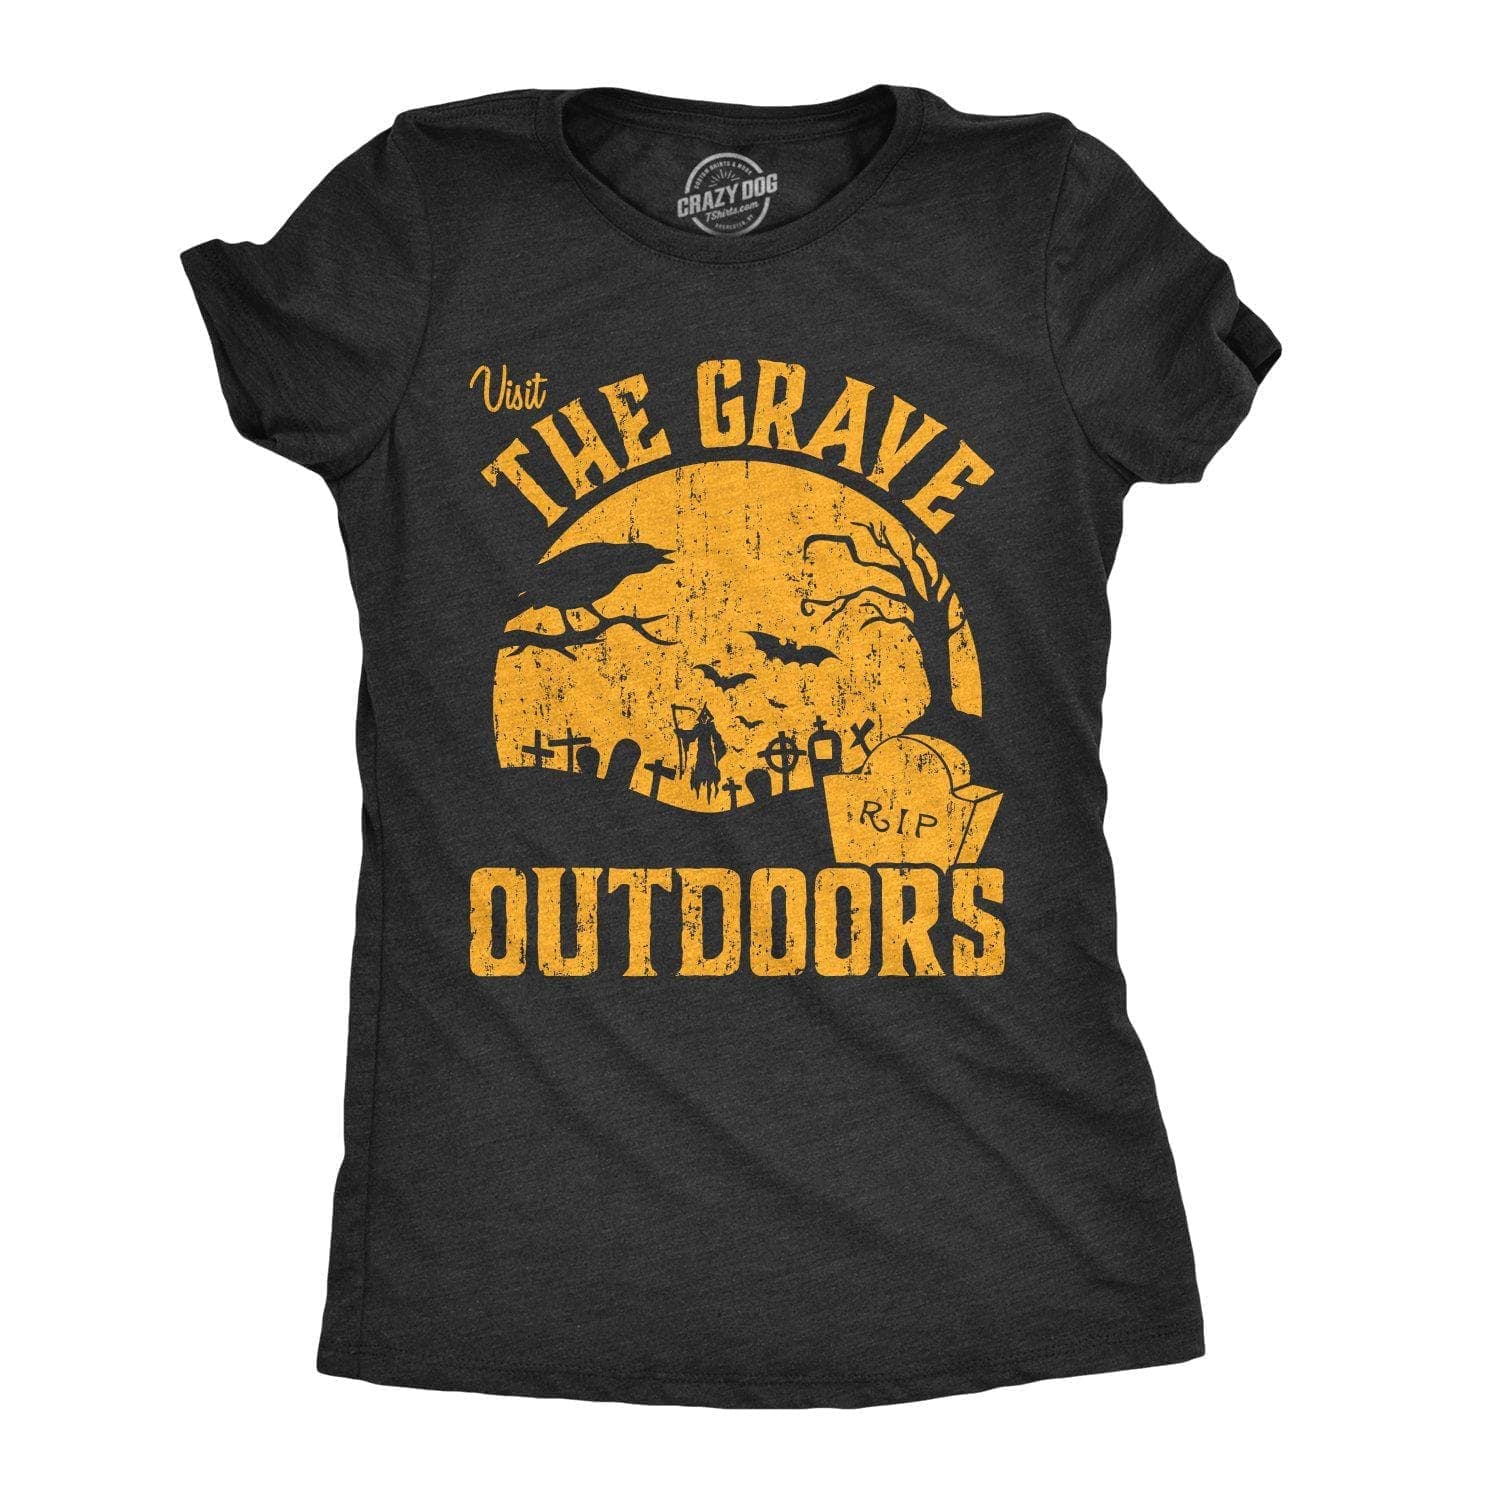 Visit The Grave Outdoors Women's Tshirt - Crazy Dog T-Shirts